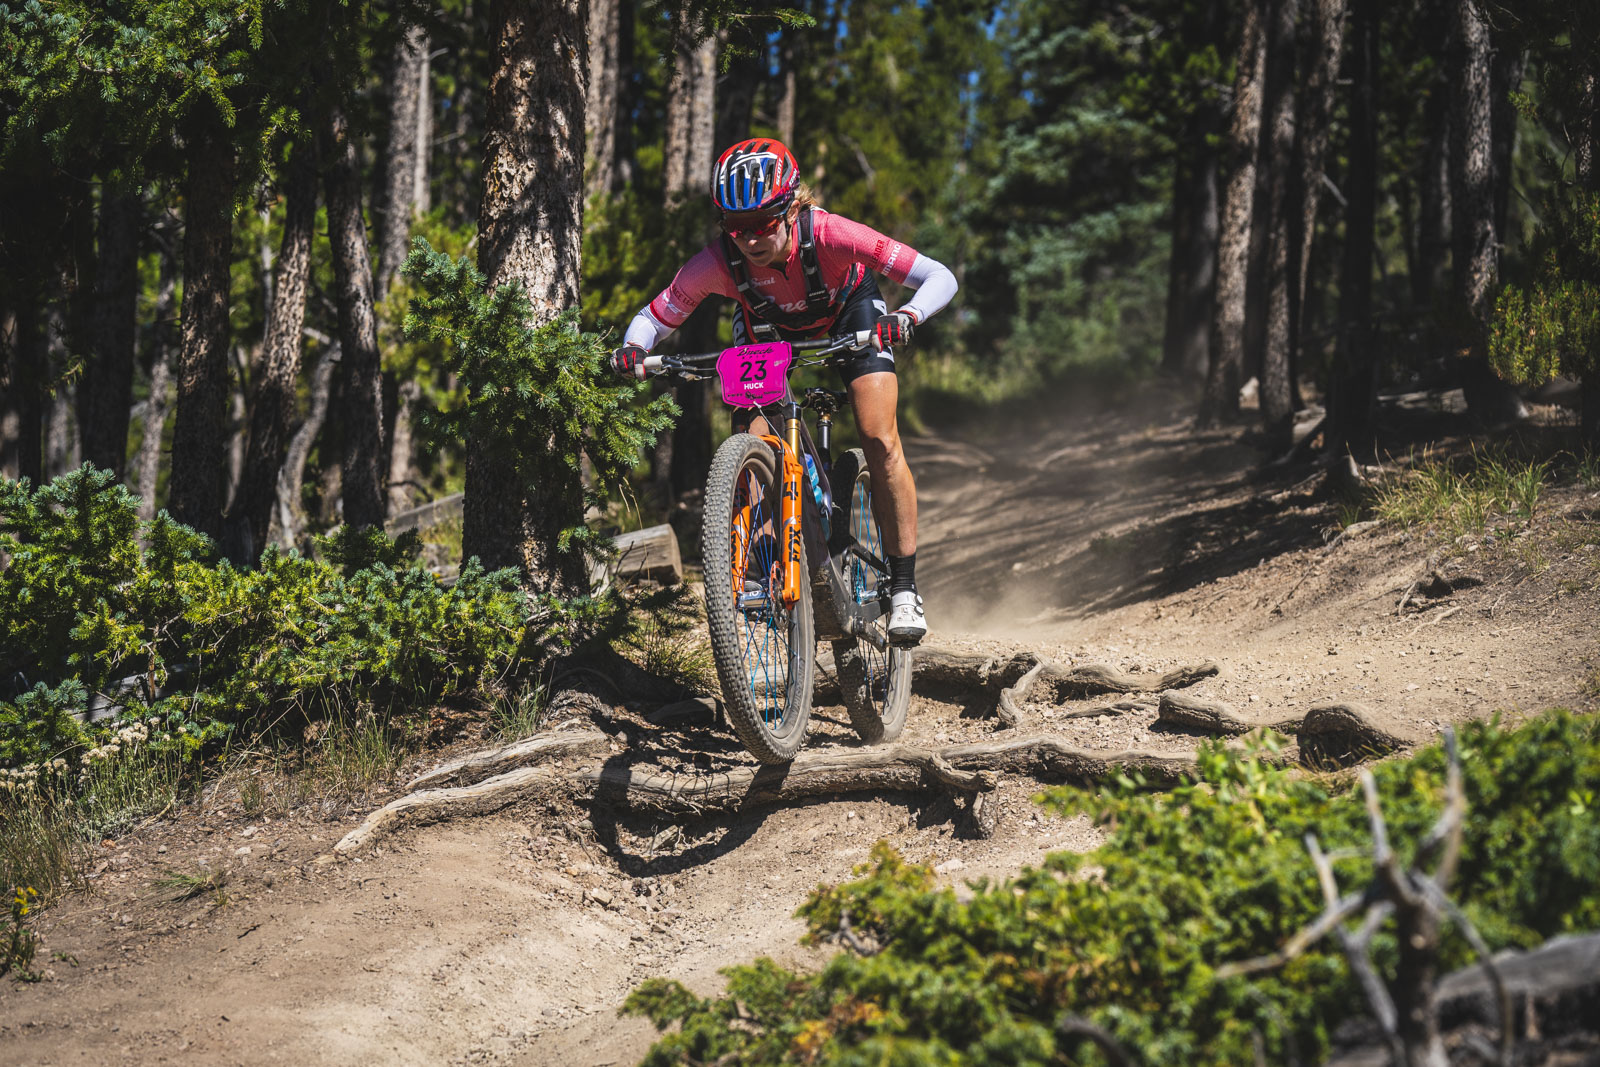 The aptly named Erin Huck shreds a descent at the 2023 Breck Epic. She's boosting off a root and in attack position, arms bent, as the front wheel goes airborne.